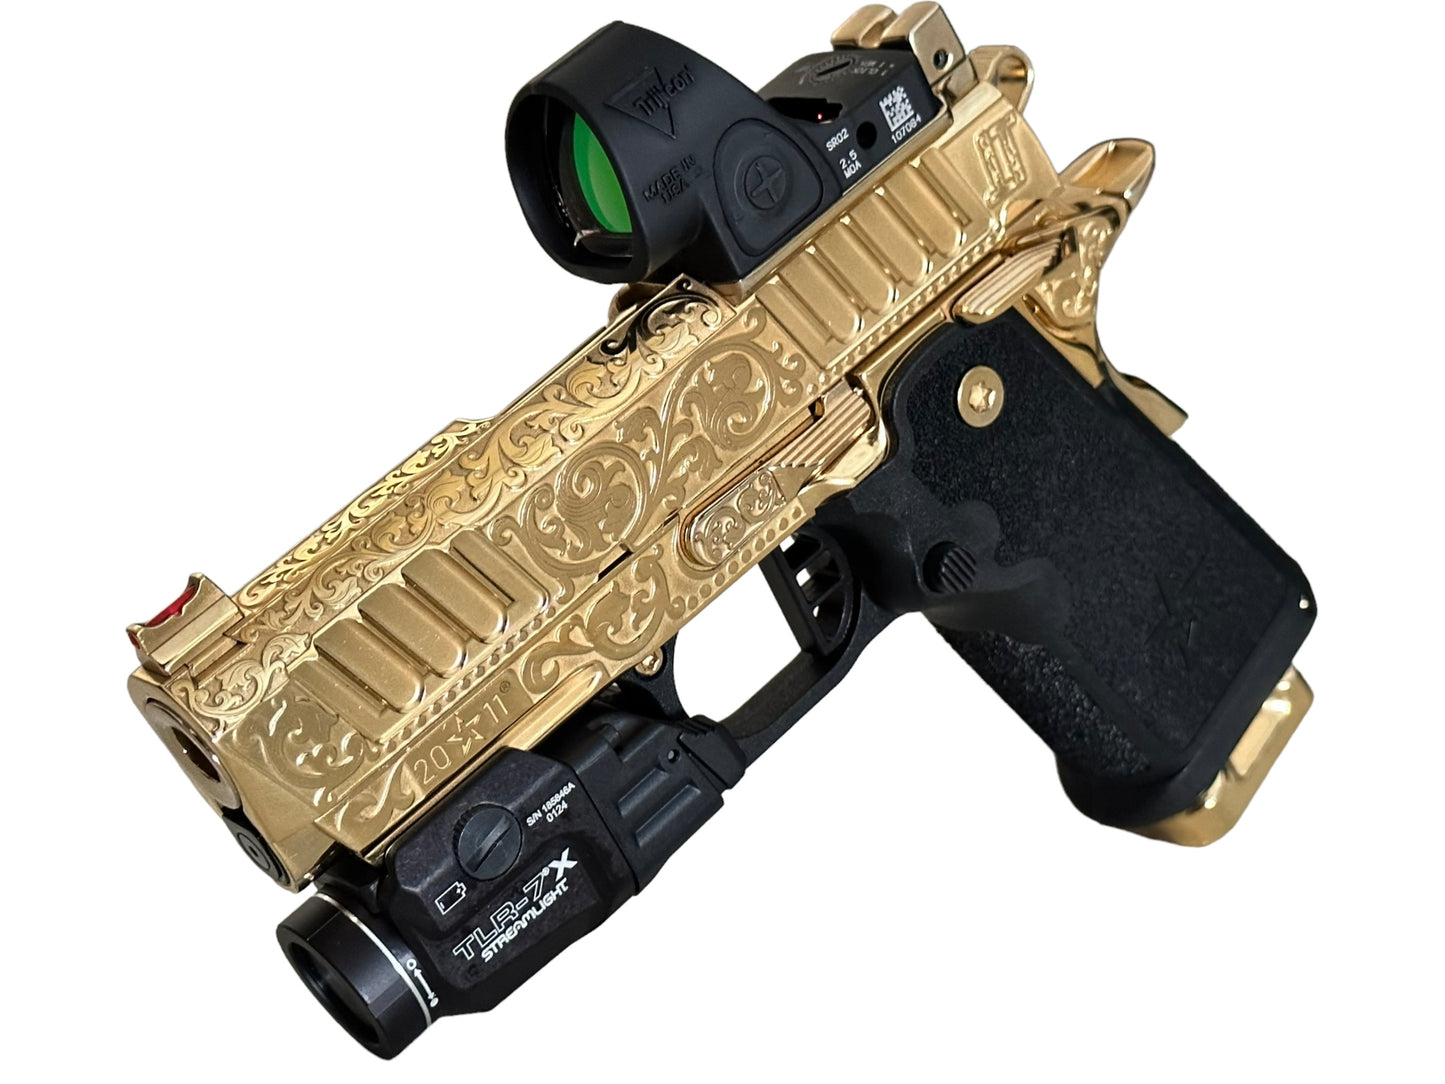 STACCATO CS 9mm FULLY ENGRAVED HIGH POLISHED AND 24k GOLD PLATED 1 OF 1